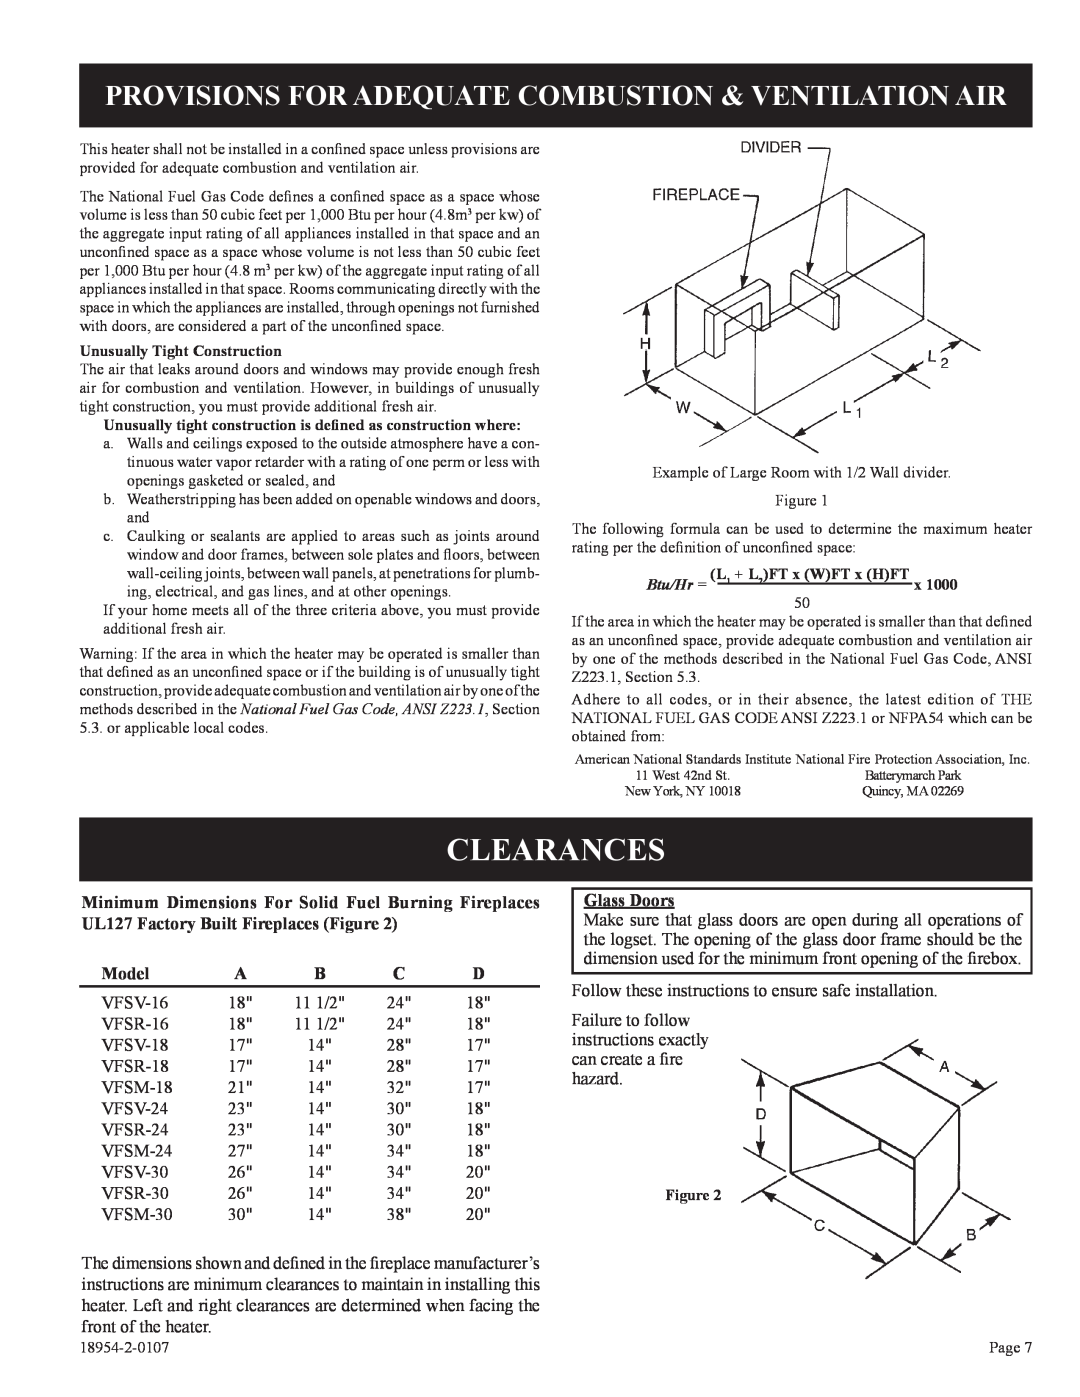 Empire Comfort Systems VFSM-30-3 installation instructions Clearances, Model, Glass Doors 